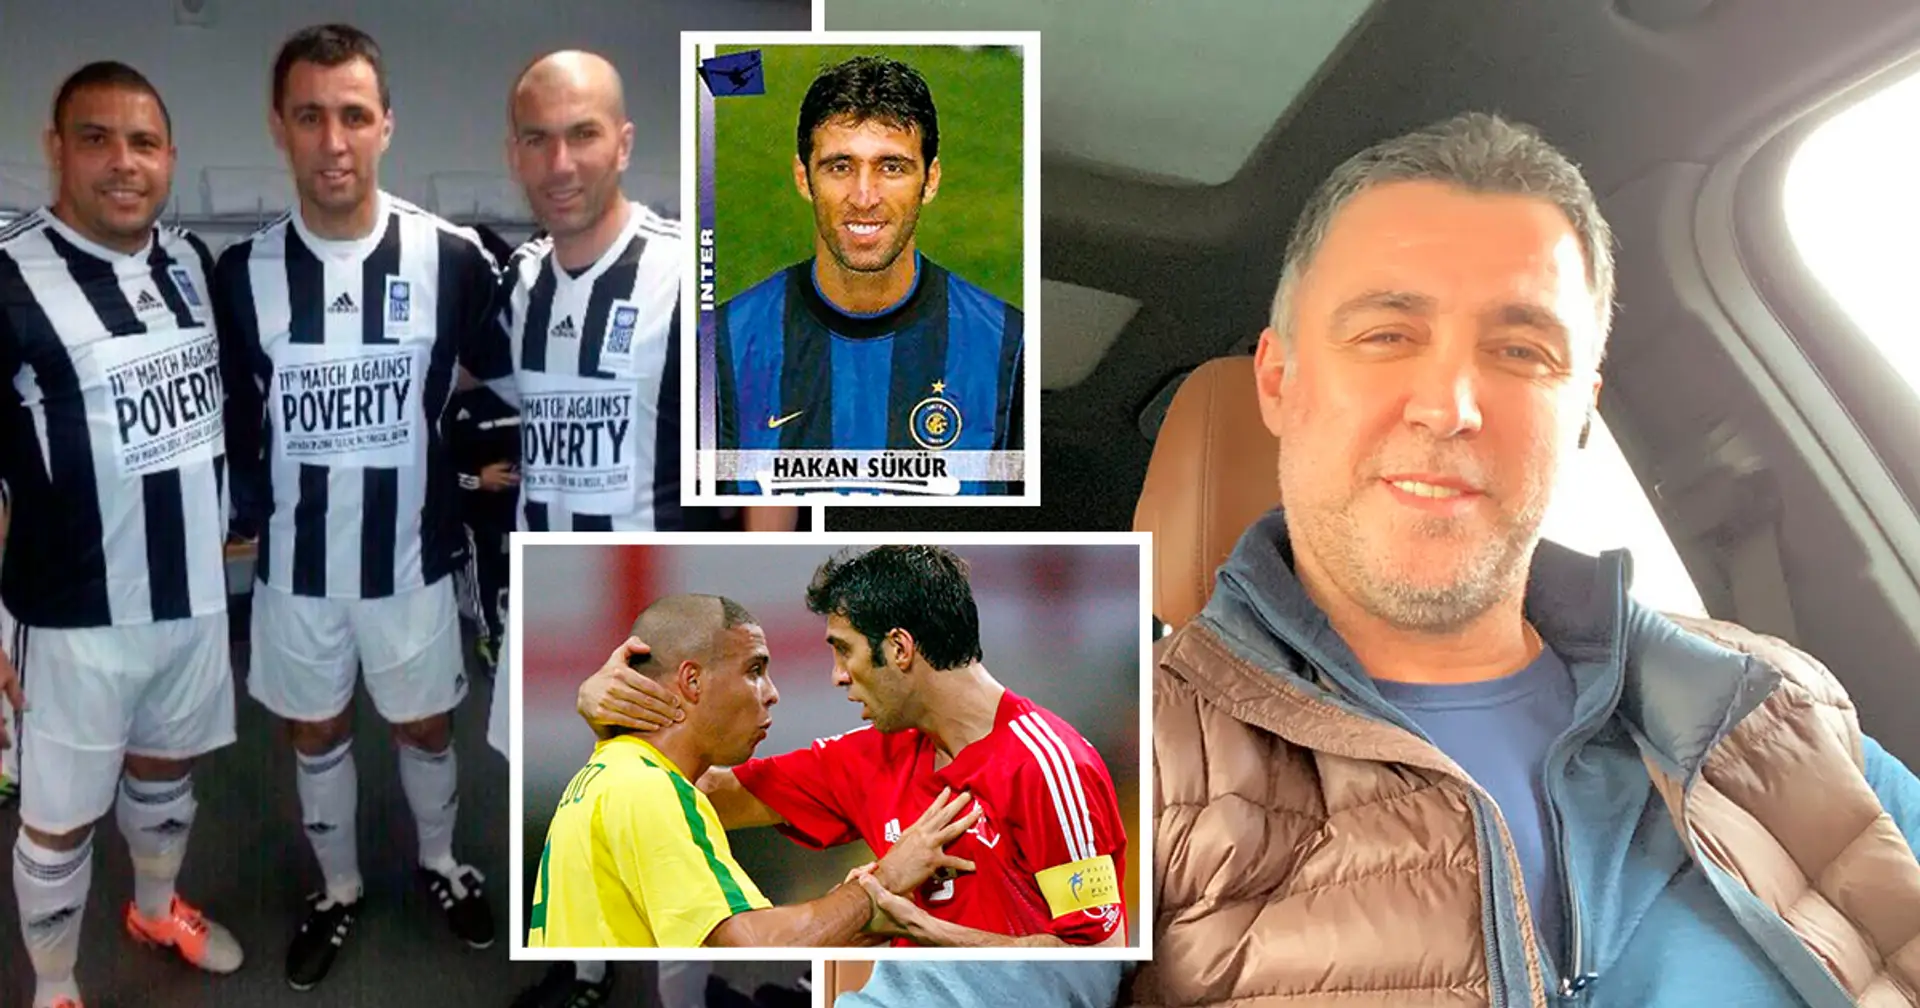 Turkey legend Hakan Sukur works as Uber driver in the US after being exiled by president Erdogan